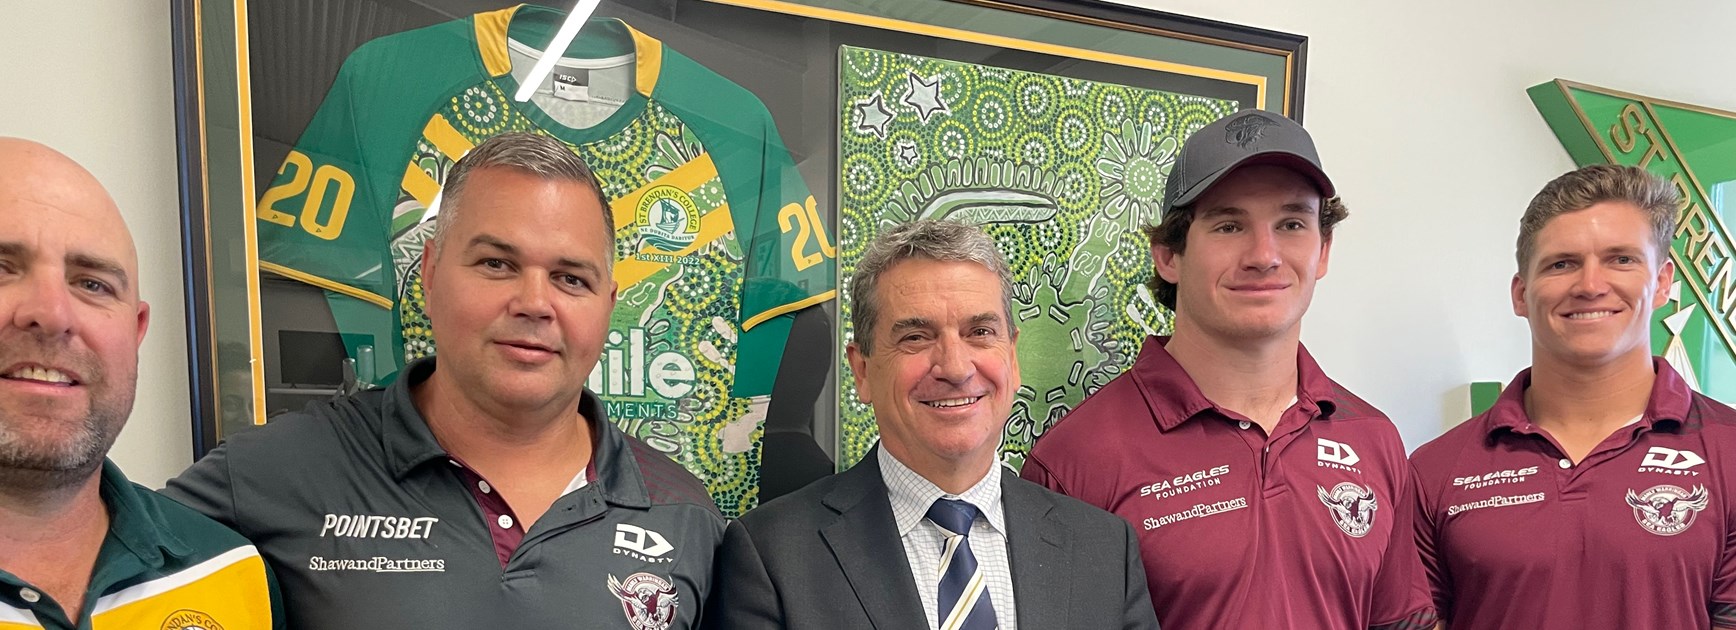 United... (l-r) Luke Caplick (Director of Rugby League), Anthony Seibold, Principal Rob Corboy, Ethan Bullemor, and Reuben Garrick at St Brendan's College, Yeppoon